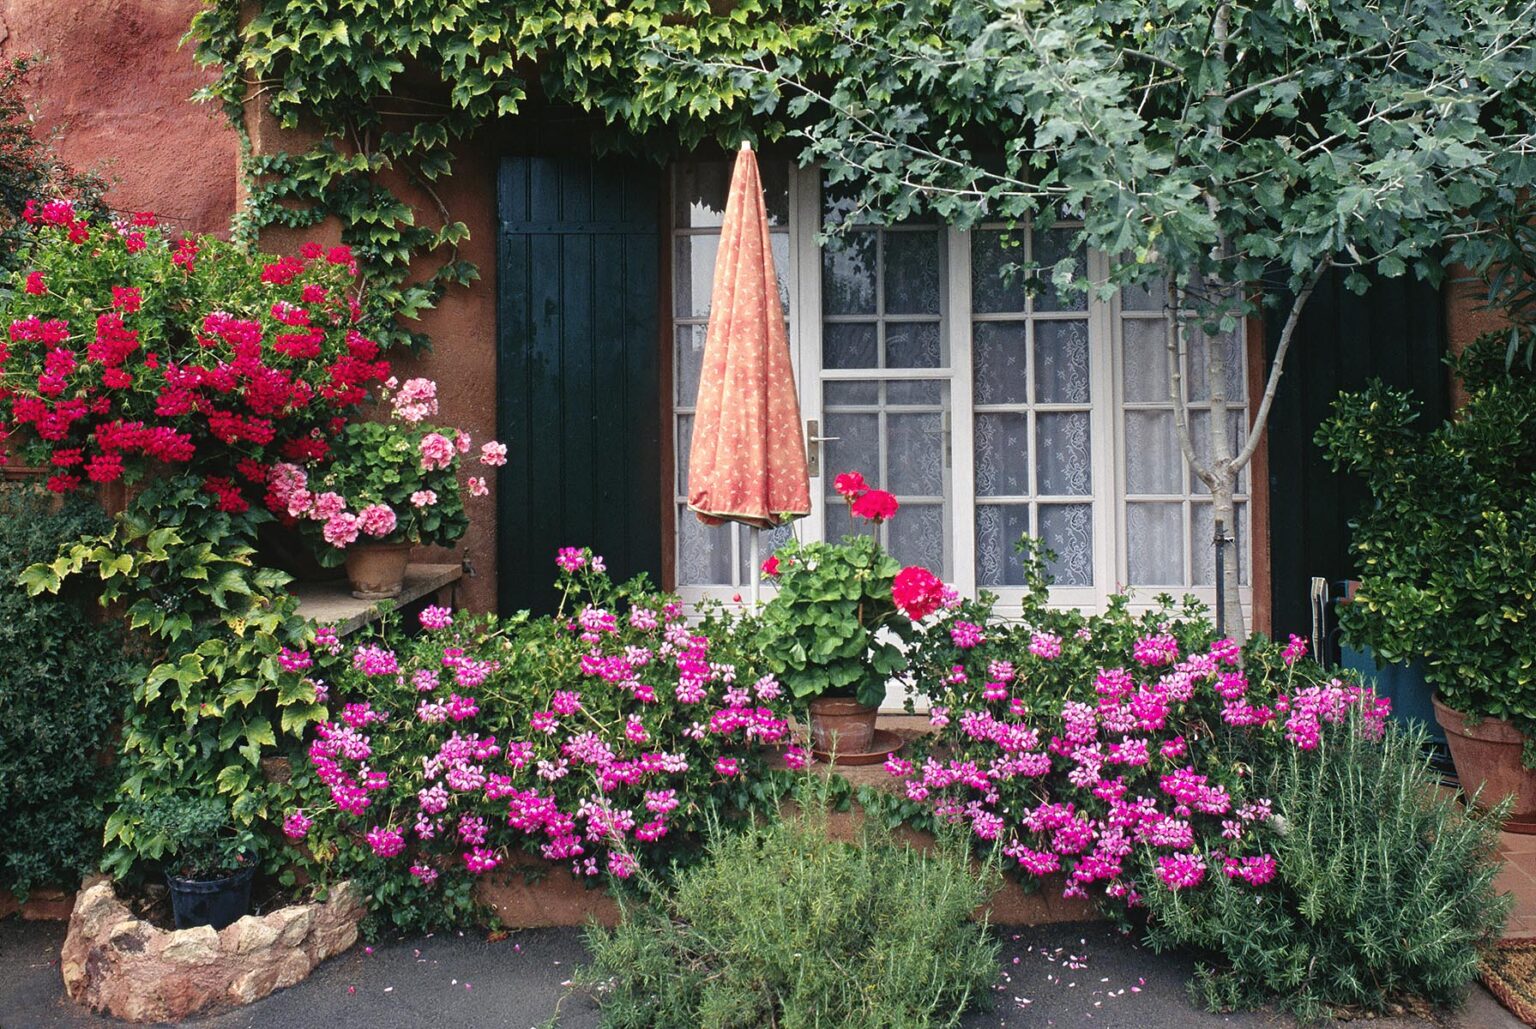 Flowers, umbrella and window of a quaint house in the Village of ROUSSILLON - PROVENCE, FRANCE